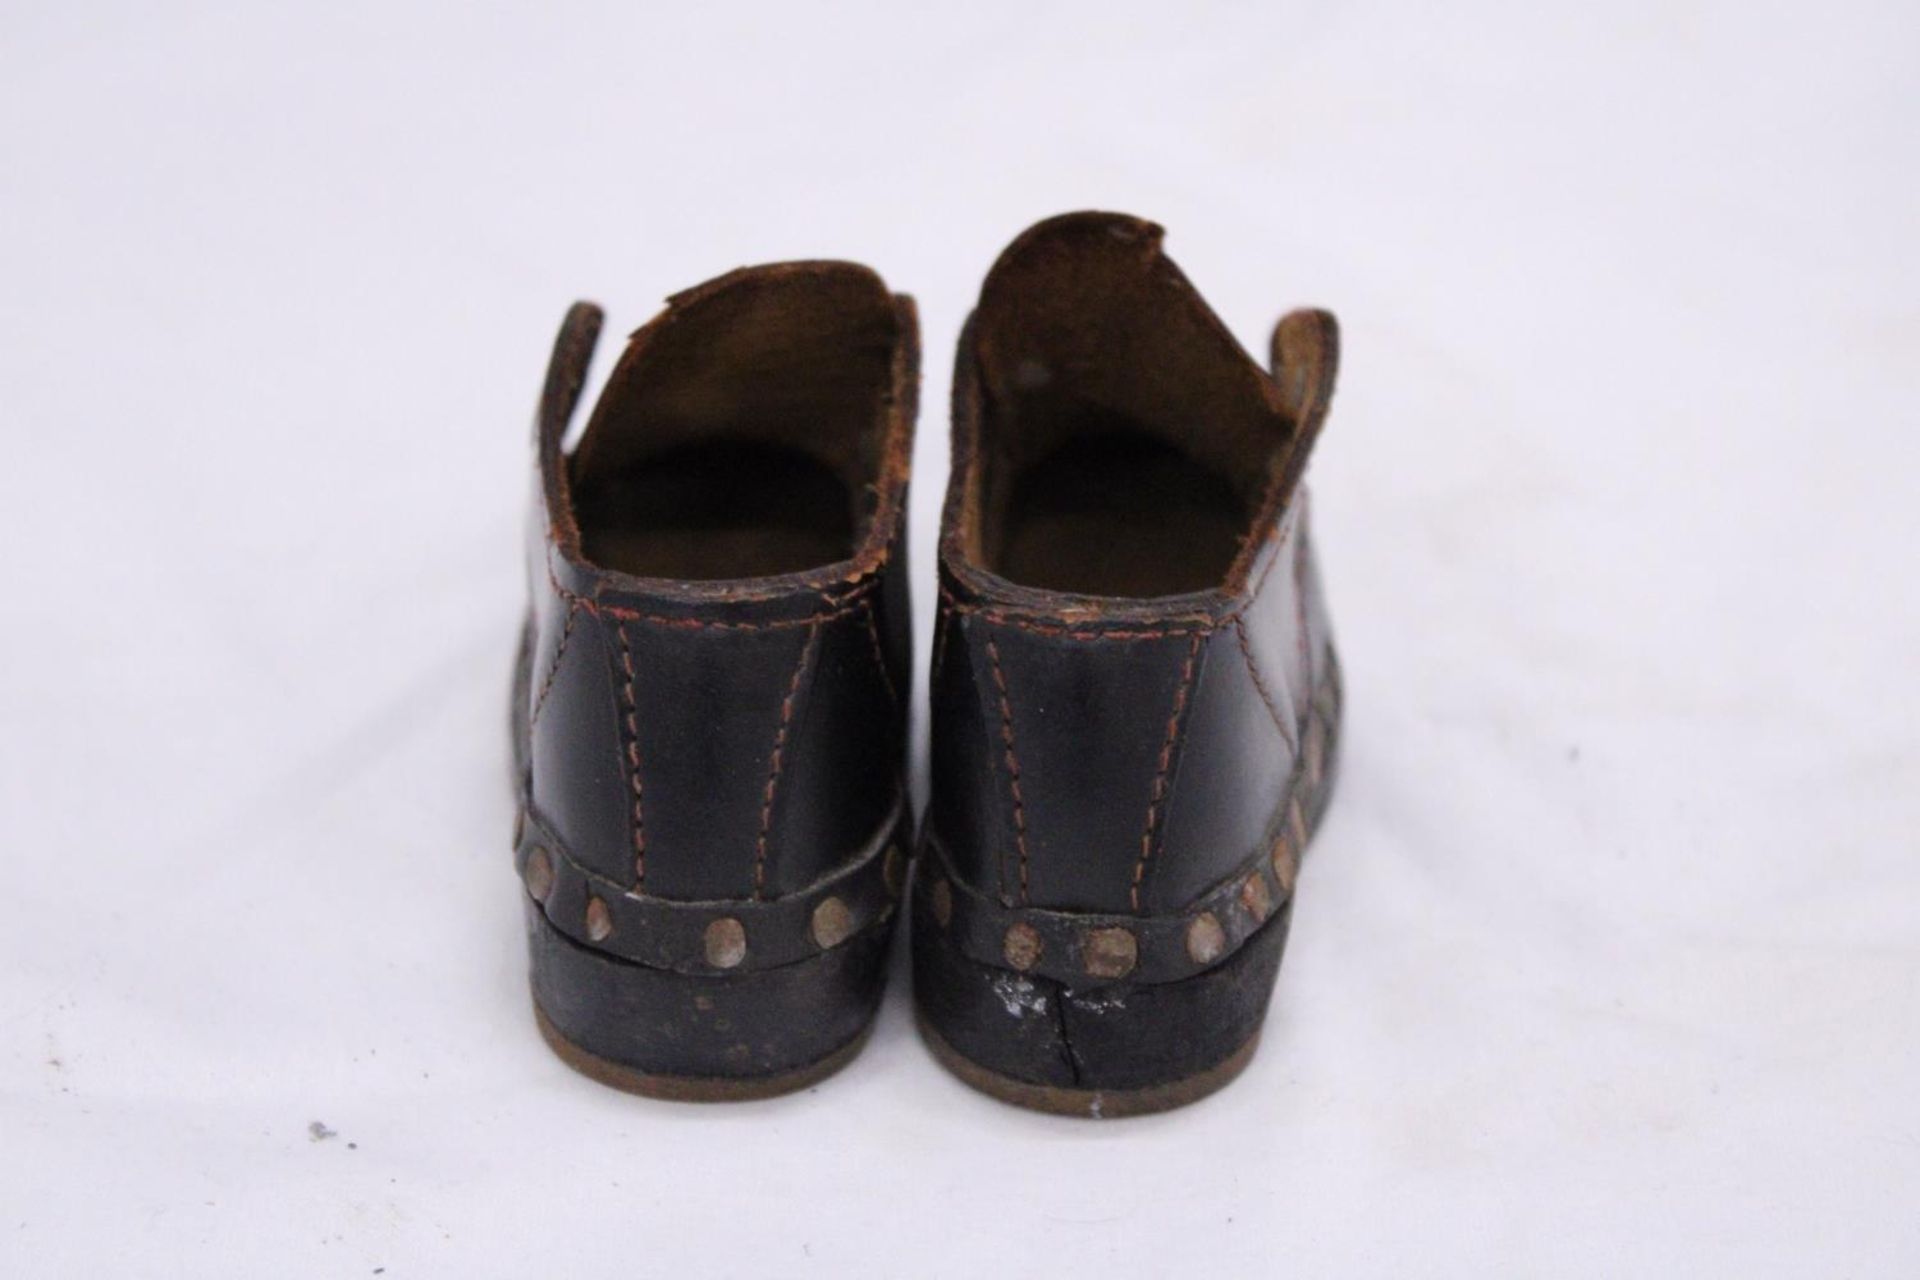 A PAIR OF VICTORIAN STYLE LEATHER (HANDMADE) CHILDREN'S SHOES - Image 3 of 5